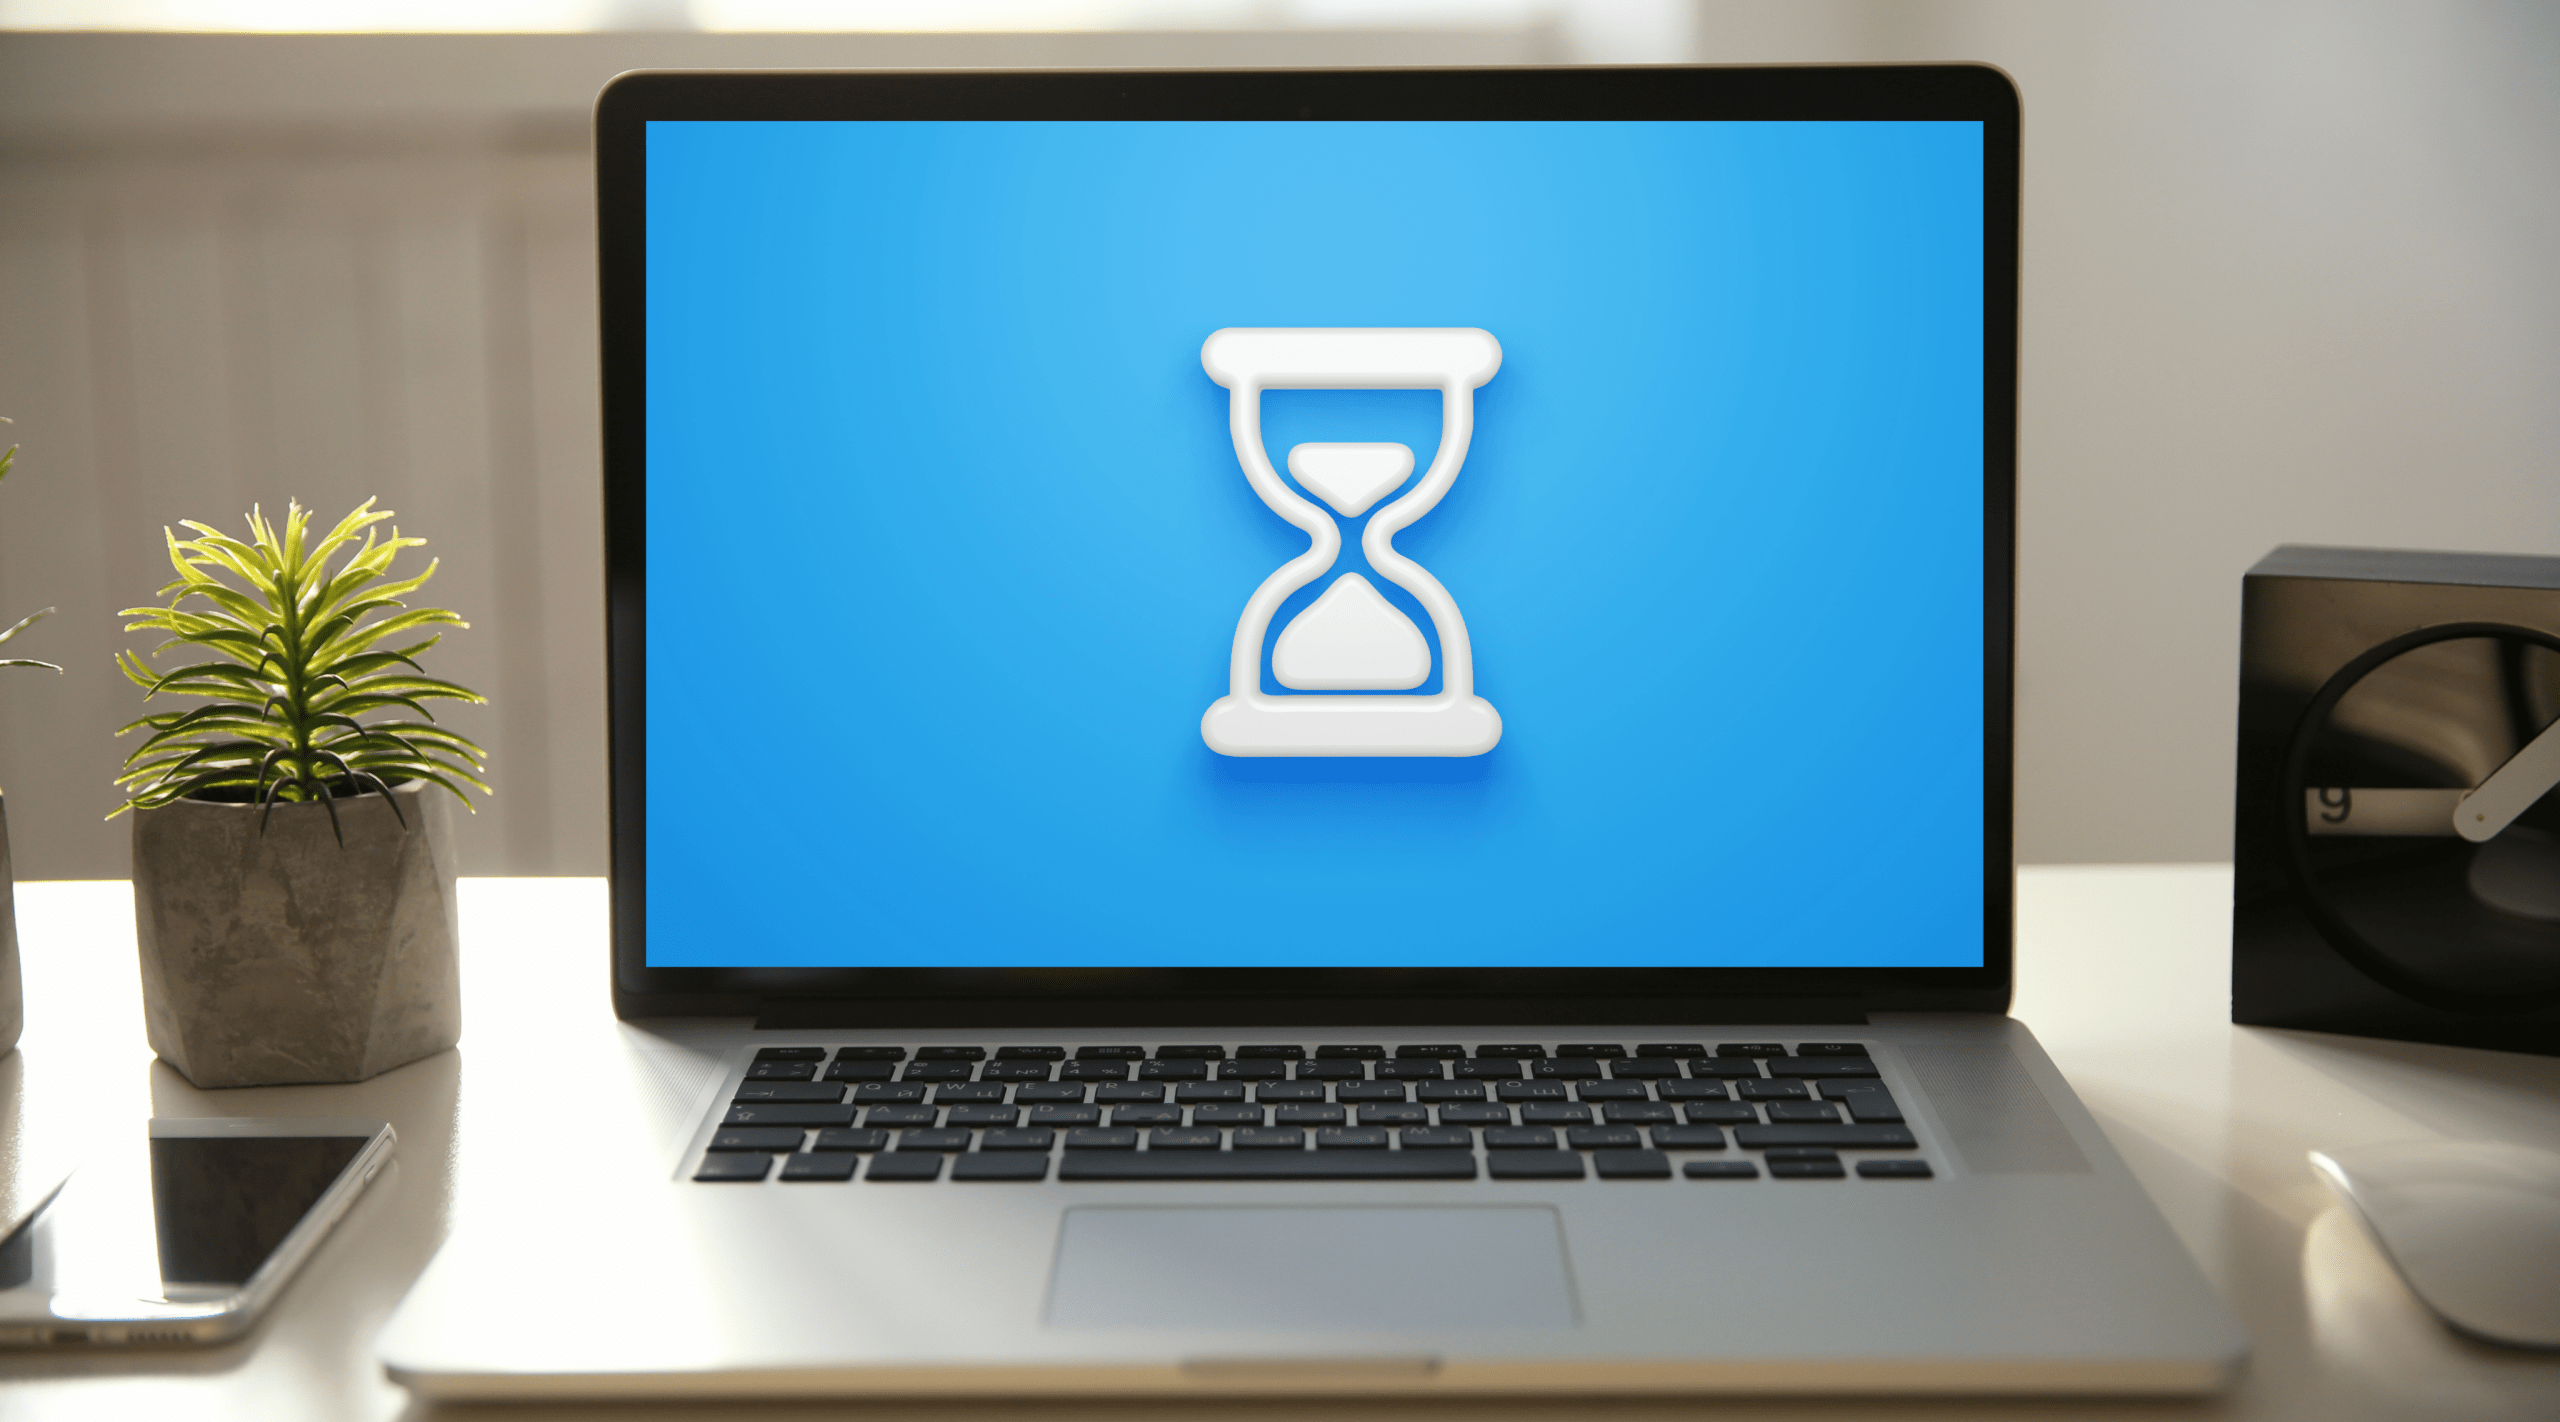 Liferay Freemarker Tips and Tricks: Date & Time blog post hero image, laptop screen on desk displaying hourglass